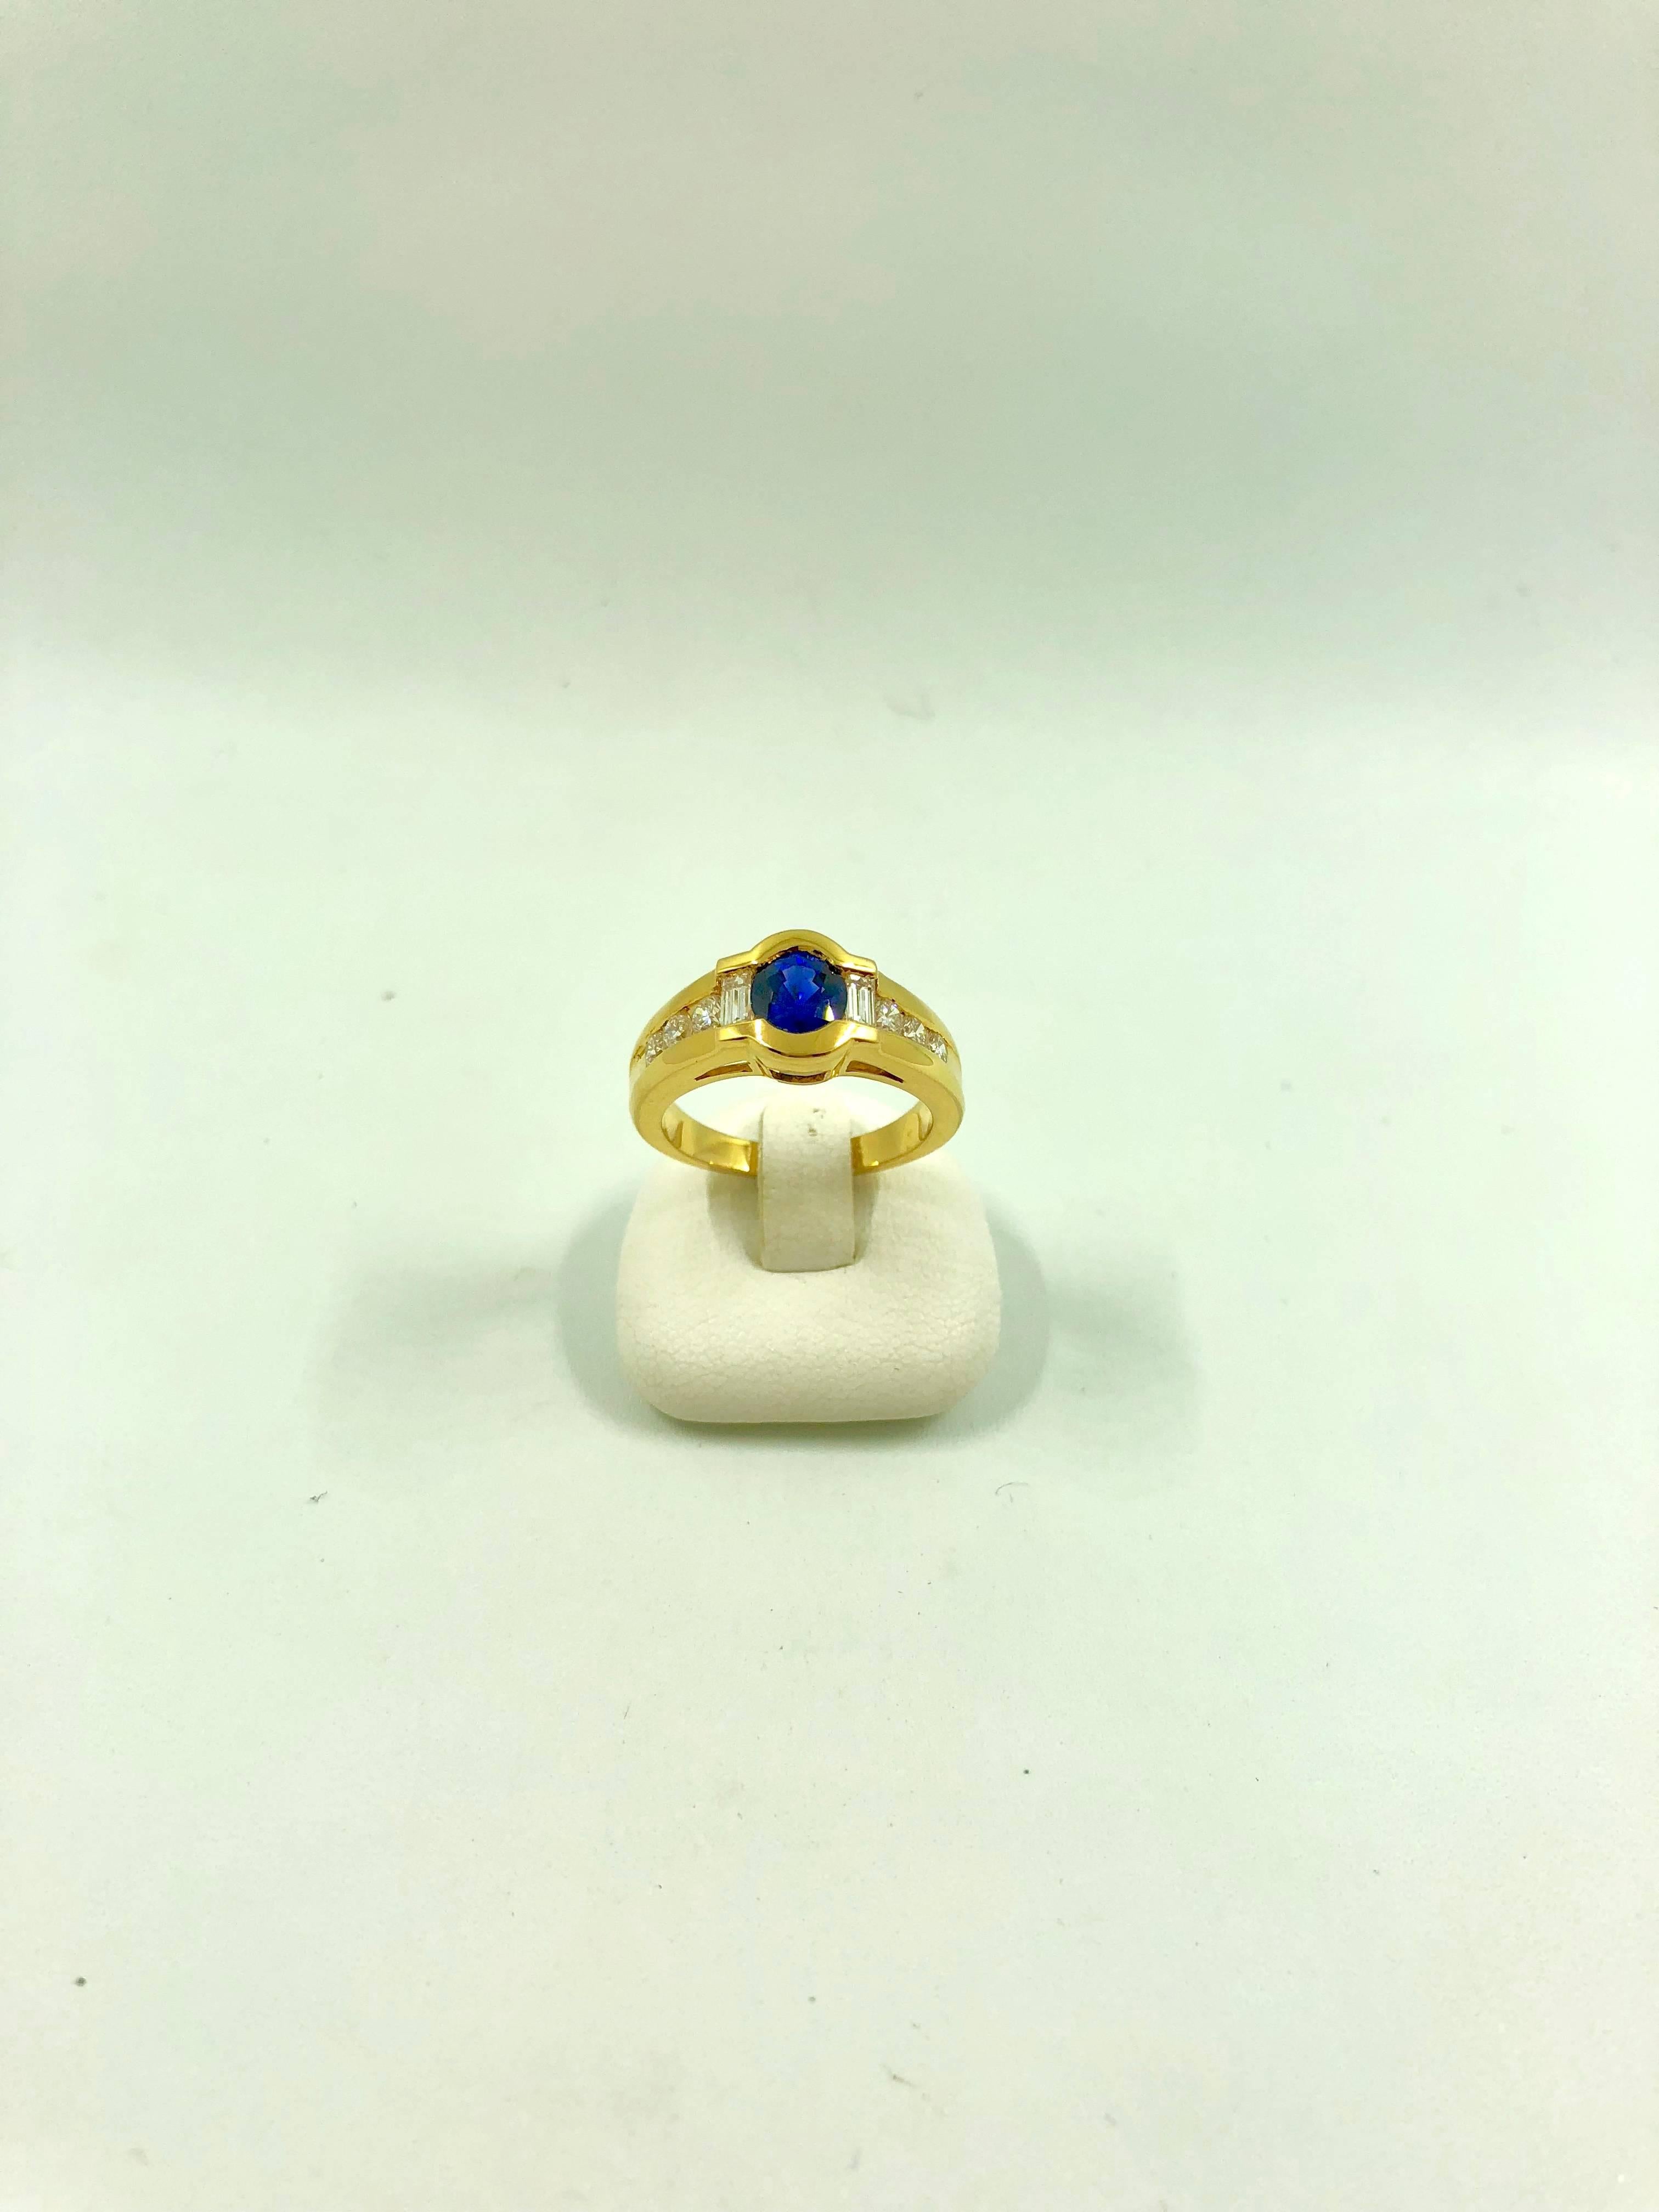 A yellow gold ring set in the middle with a blue sapphire surrounded by a baguette cut diamond and three brilliant cut diamond on each side.
Total Diamond Weight: 0.62 carat
Sapphire Weight: 1.09 carat
Net Weight: 6.60 grams
Finger Size: 6.5 can be